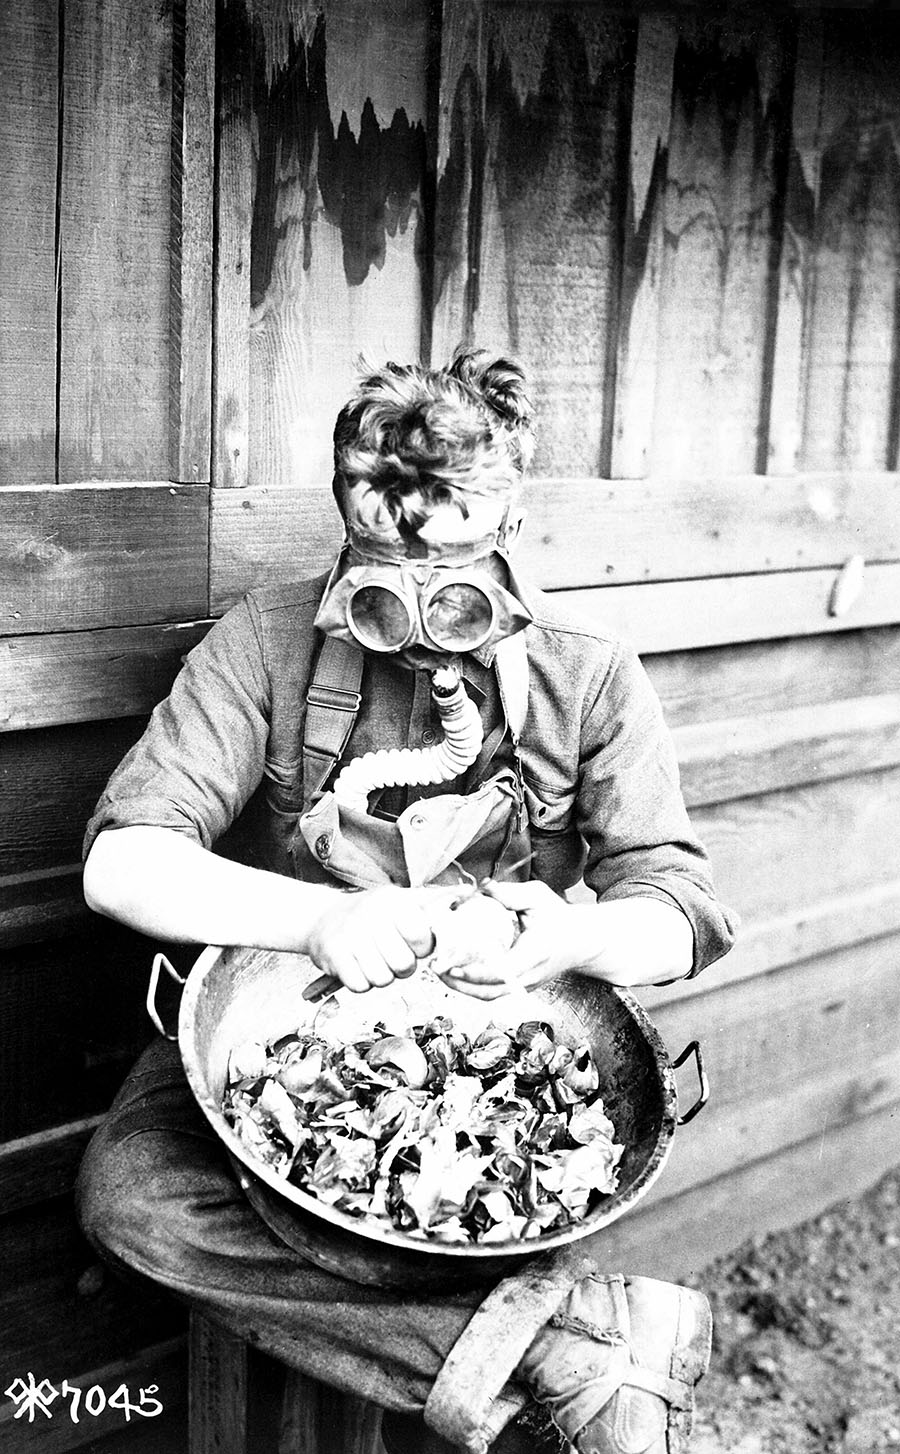 Though yet to see combat, a private in the 40th Division assigned onion peeling duty at Camp Kearny near San Diego, California, in March 1918 finds a way to put his mask and chemical warfare training to good use. (U.S. Army/National Archives)